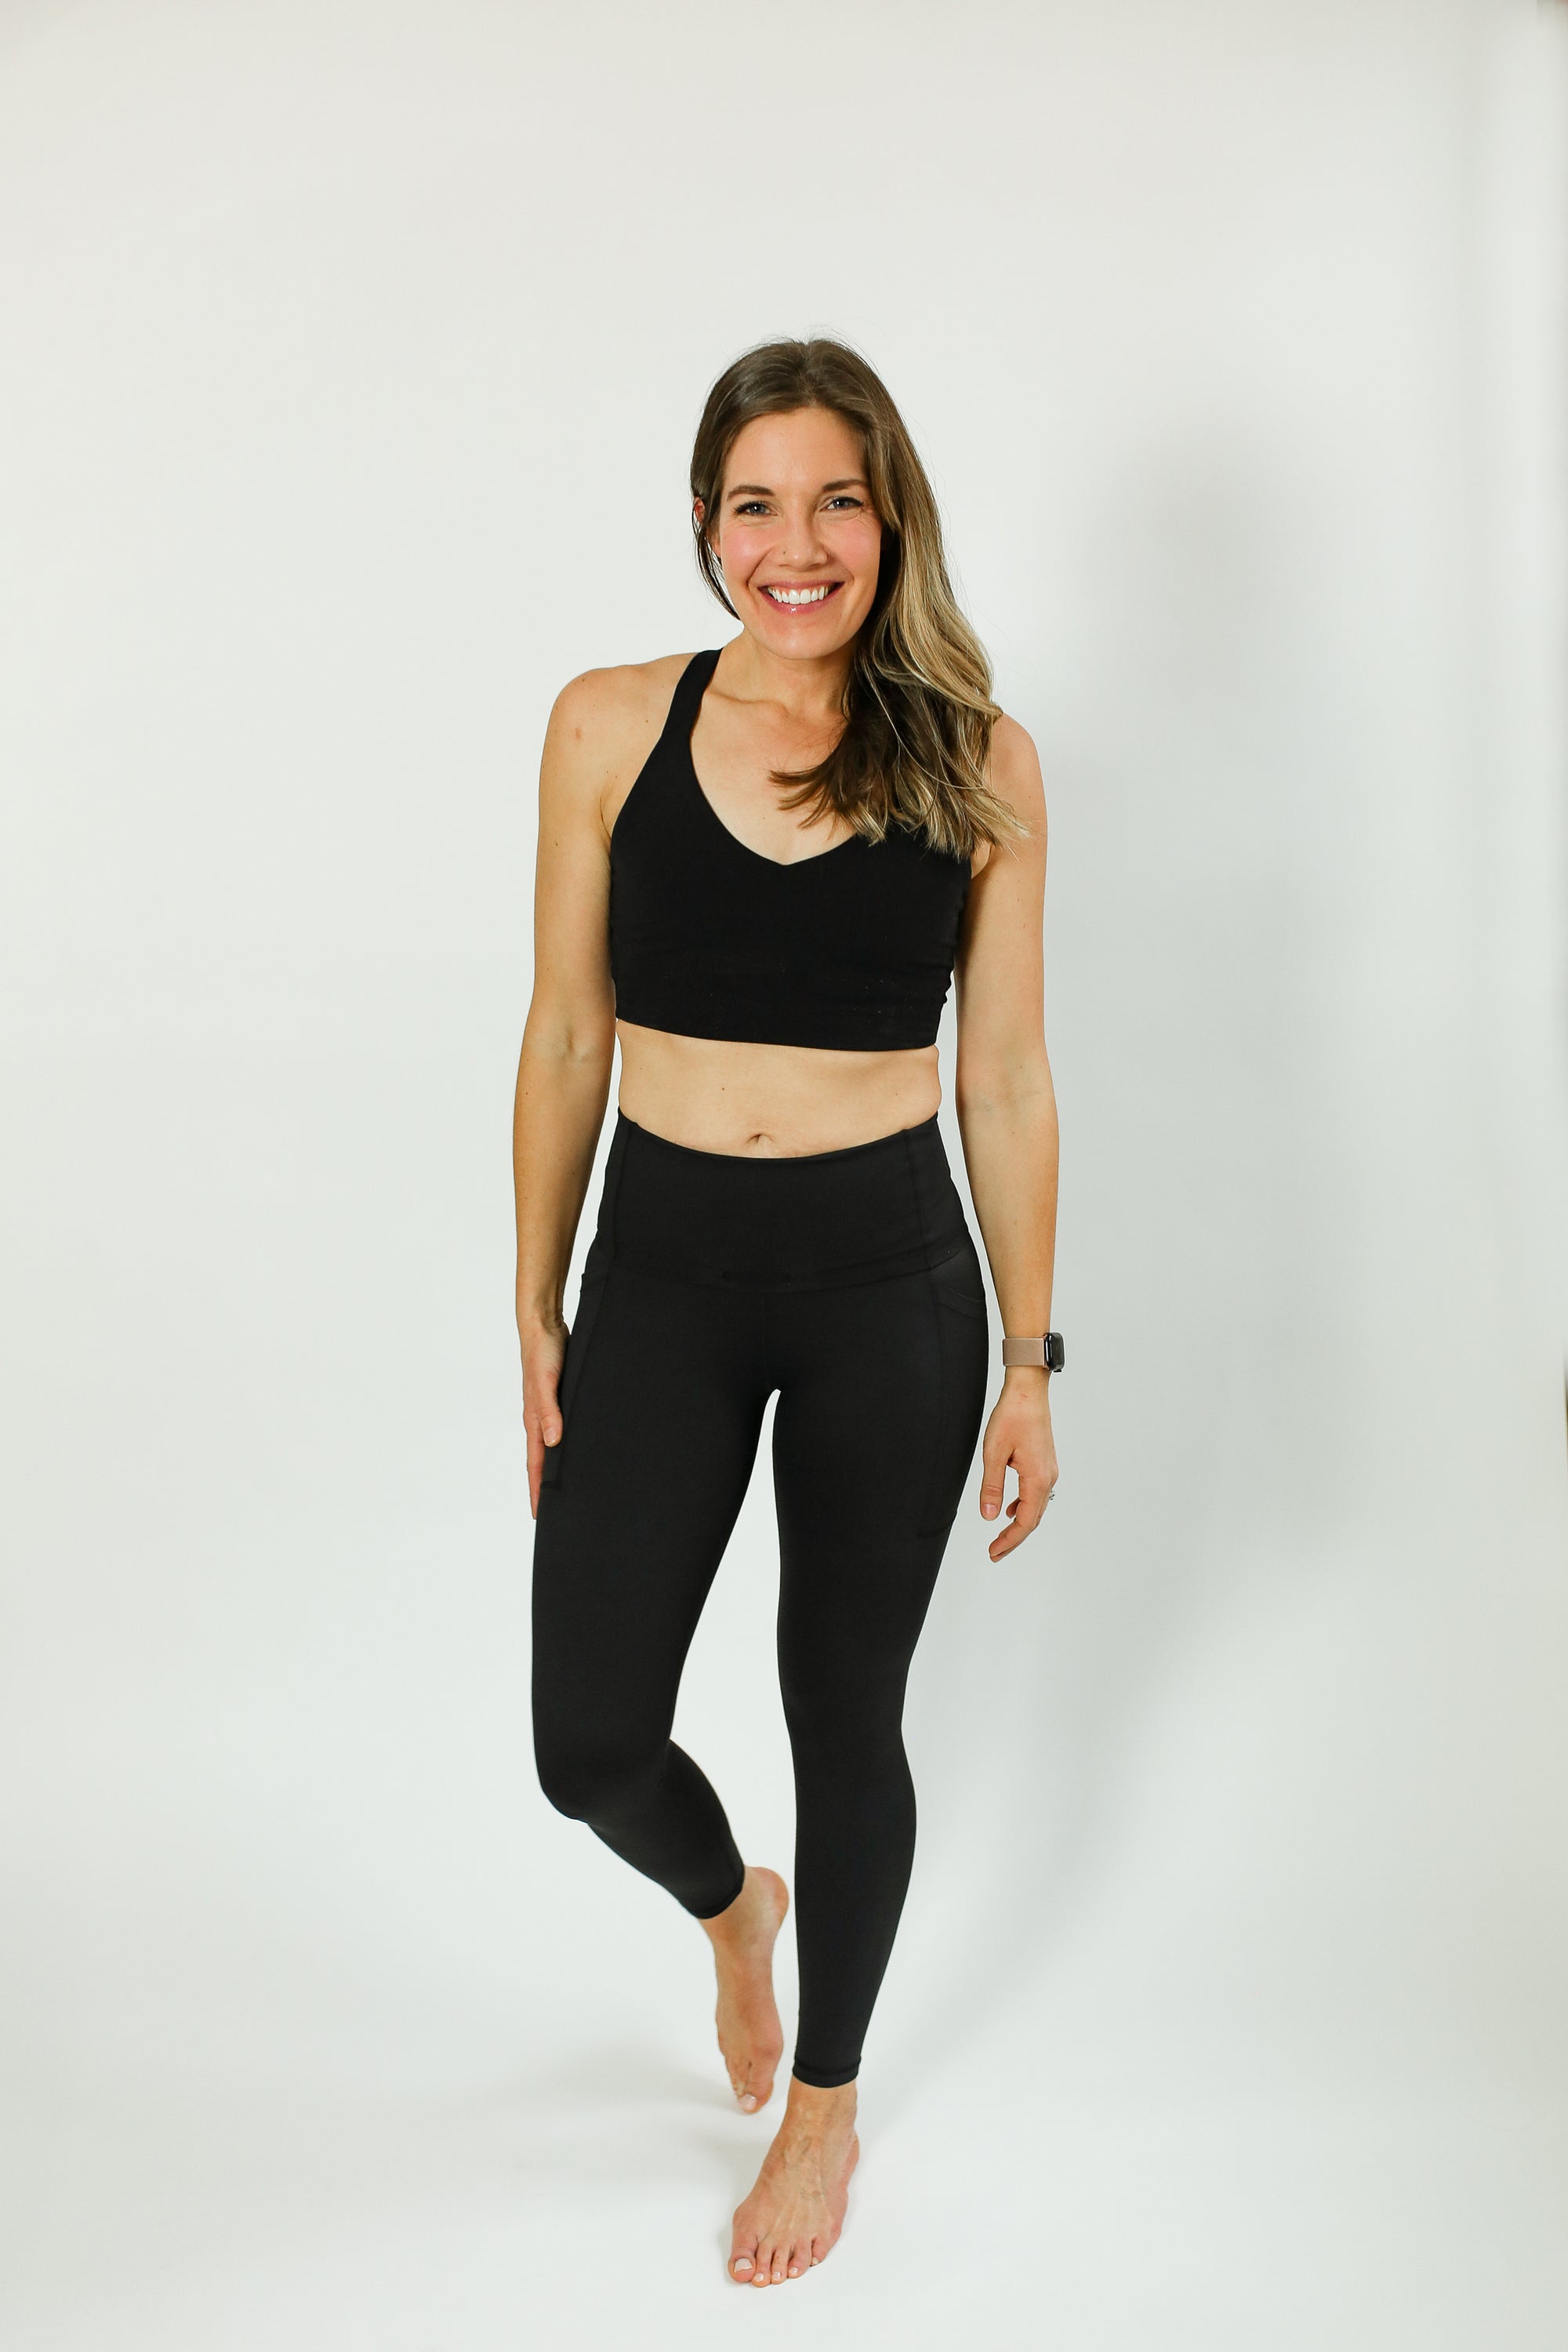 ACTIVEWEAR REVIEW for ZYIA - leggings & tank 